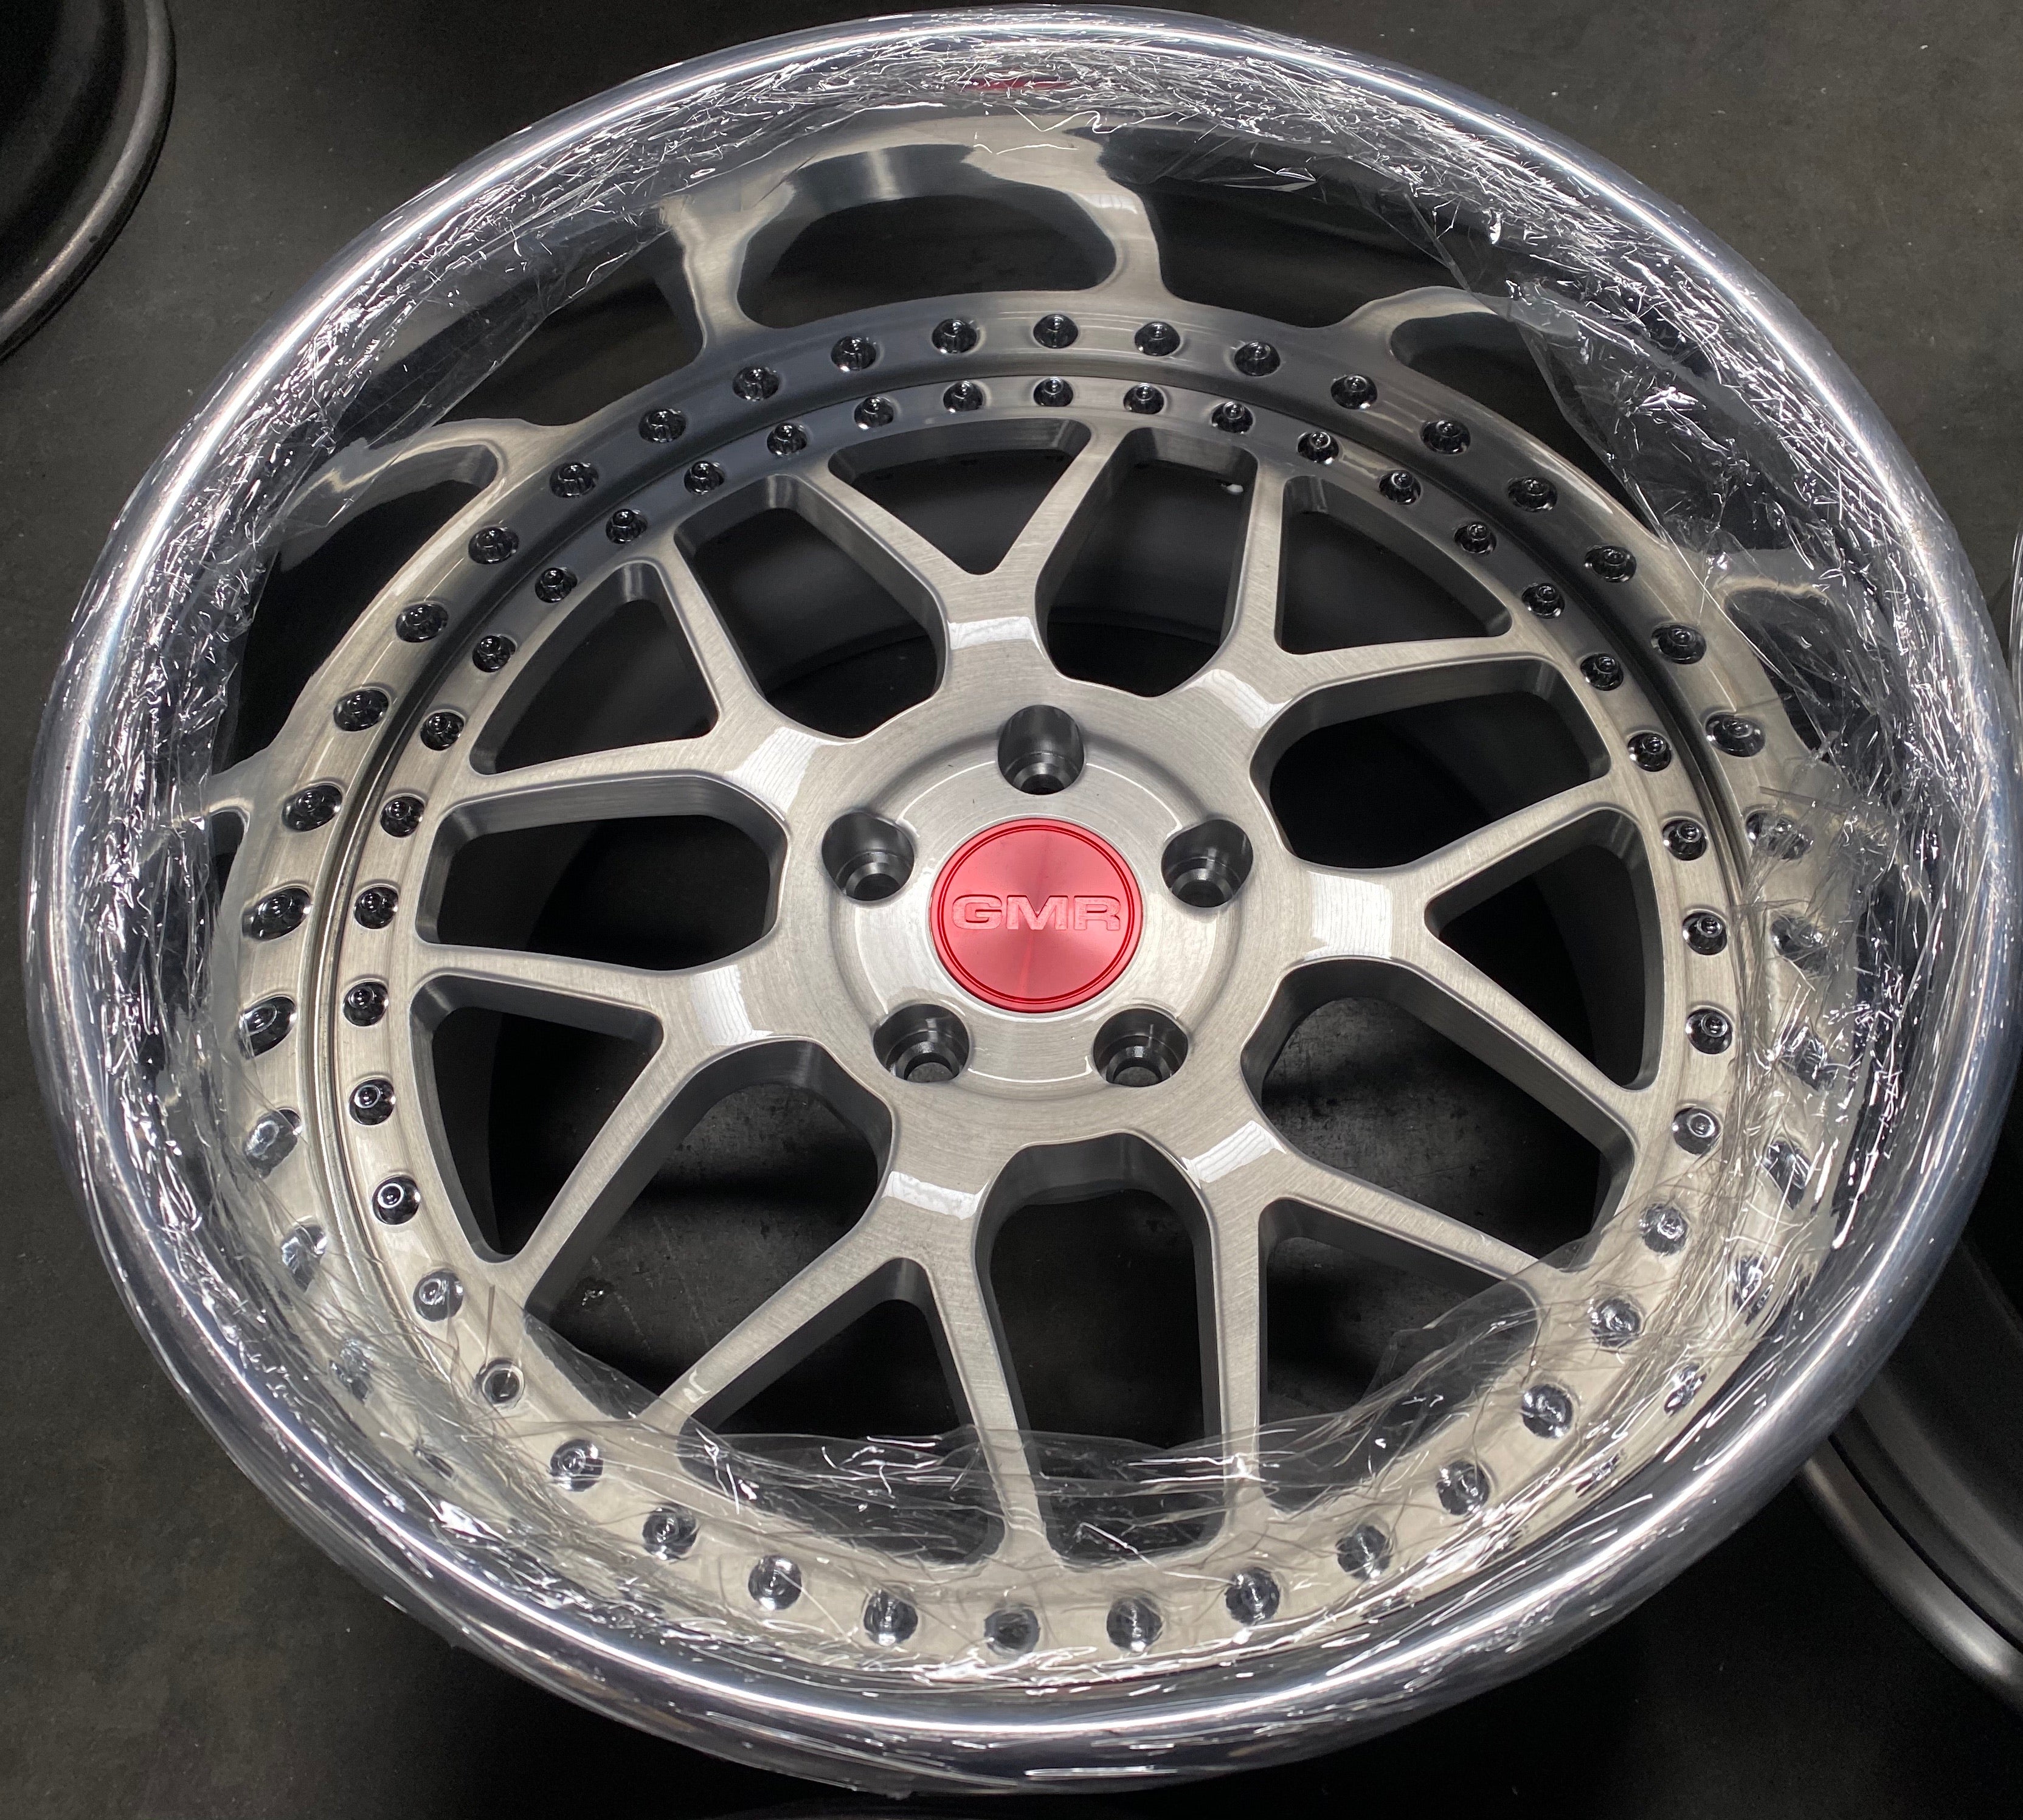 18” GMR GS-5 5x114.3 *BUILT TO ORDER*